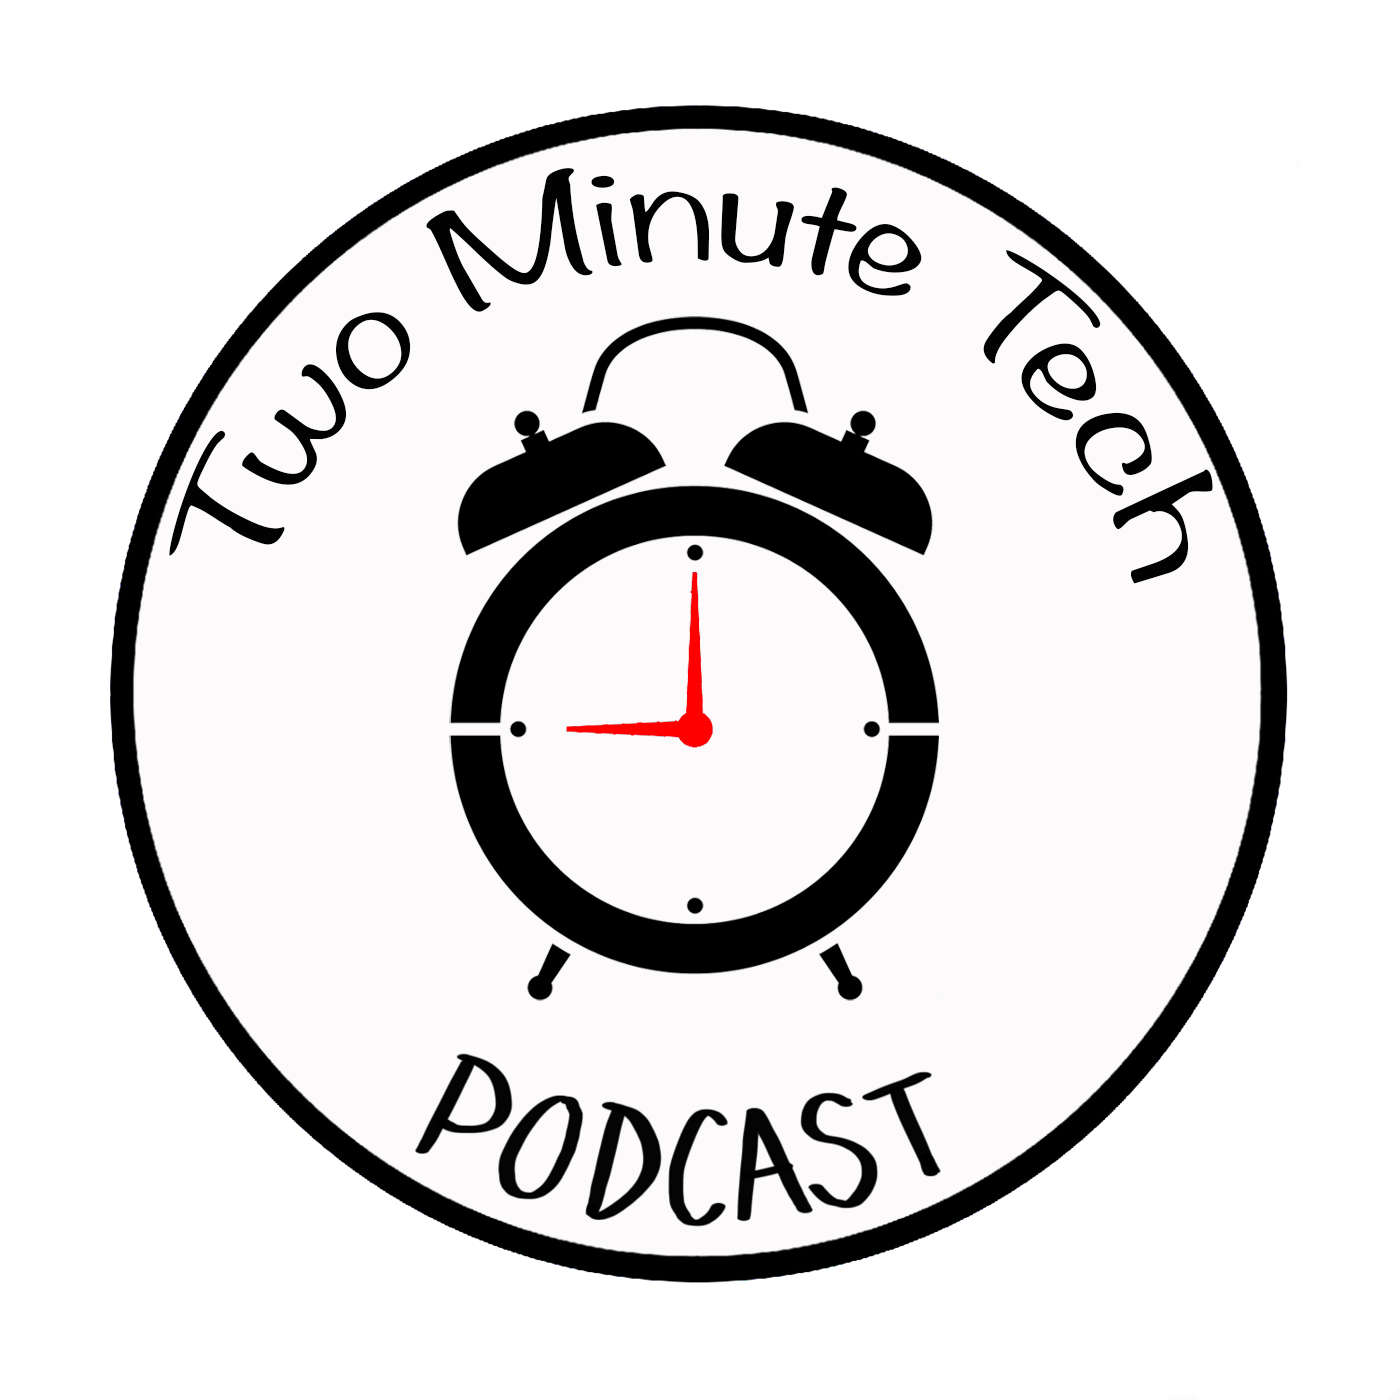 Episode 148 - Set Apple Watch to unlock your Mac and track your sleep